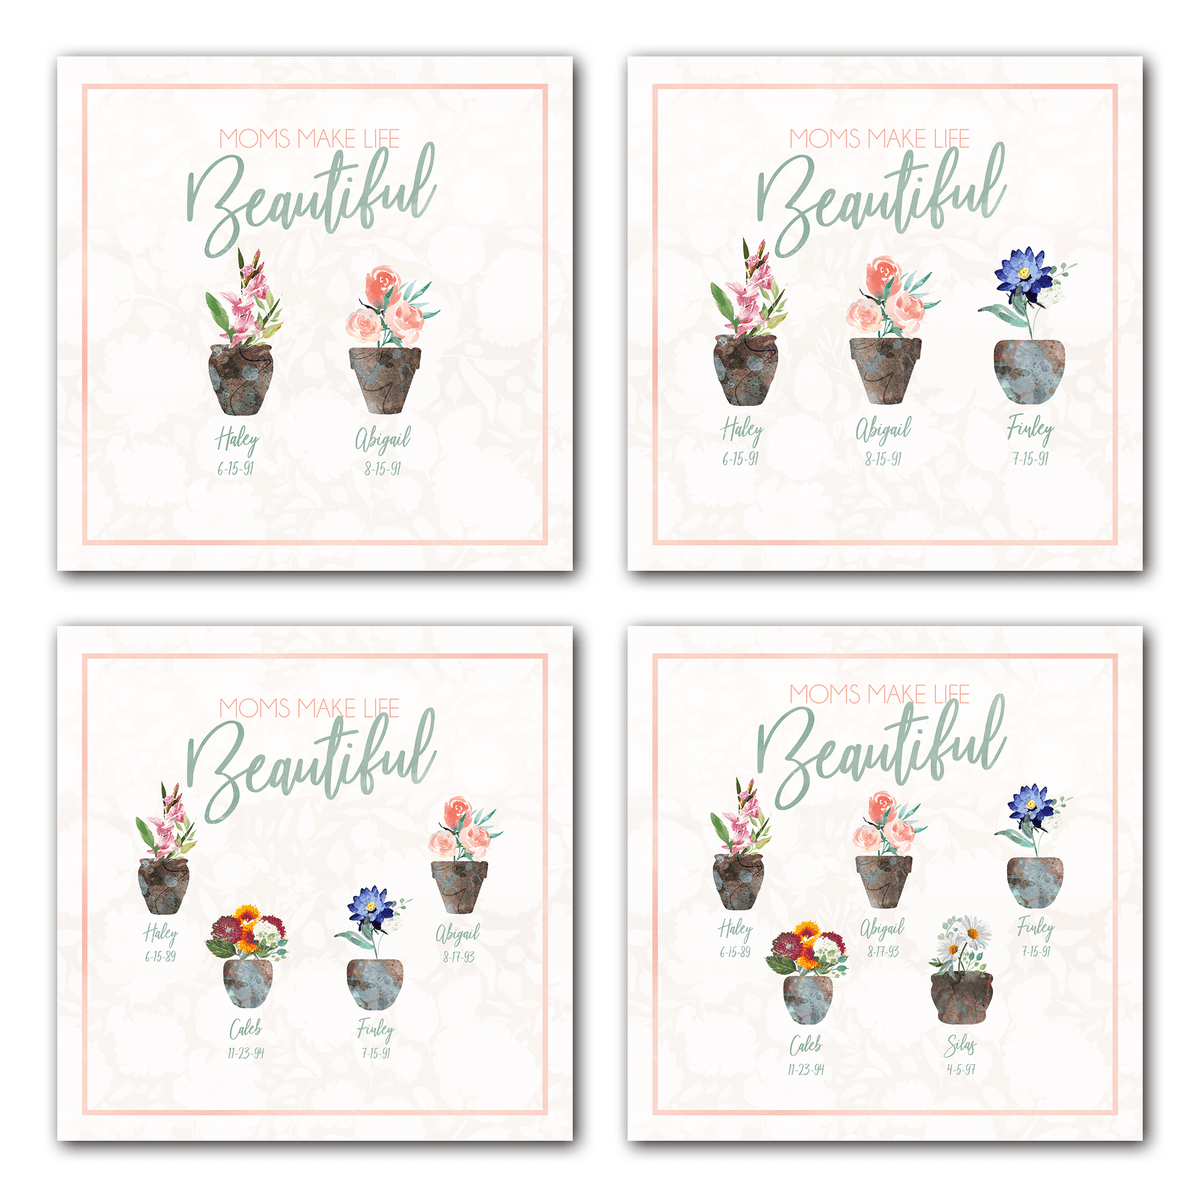 Personalized with one through five birth month flowers along with the name and birthdate of each child